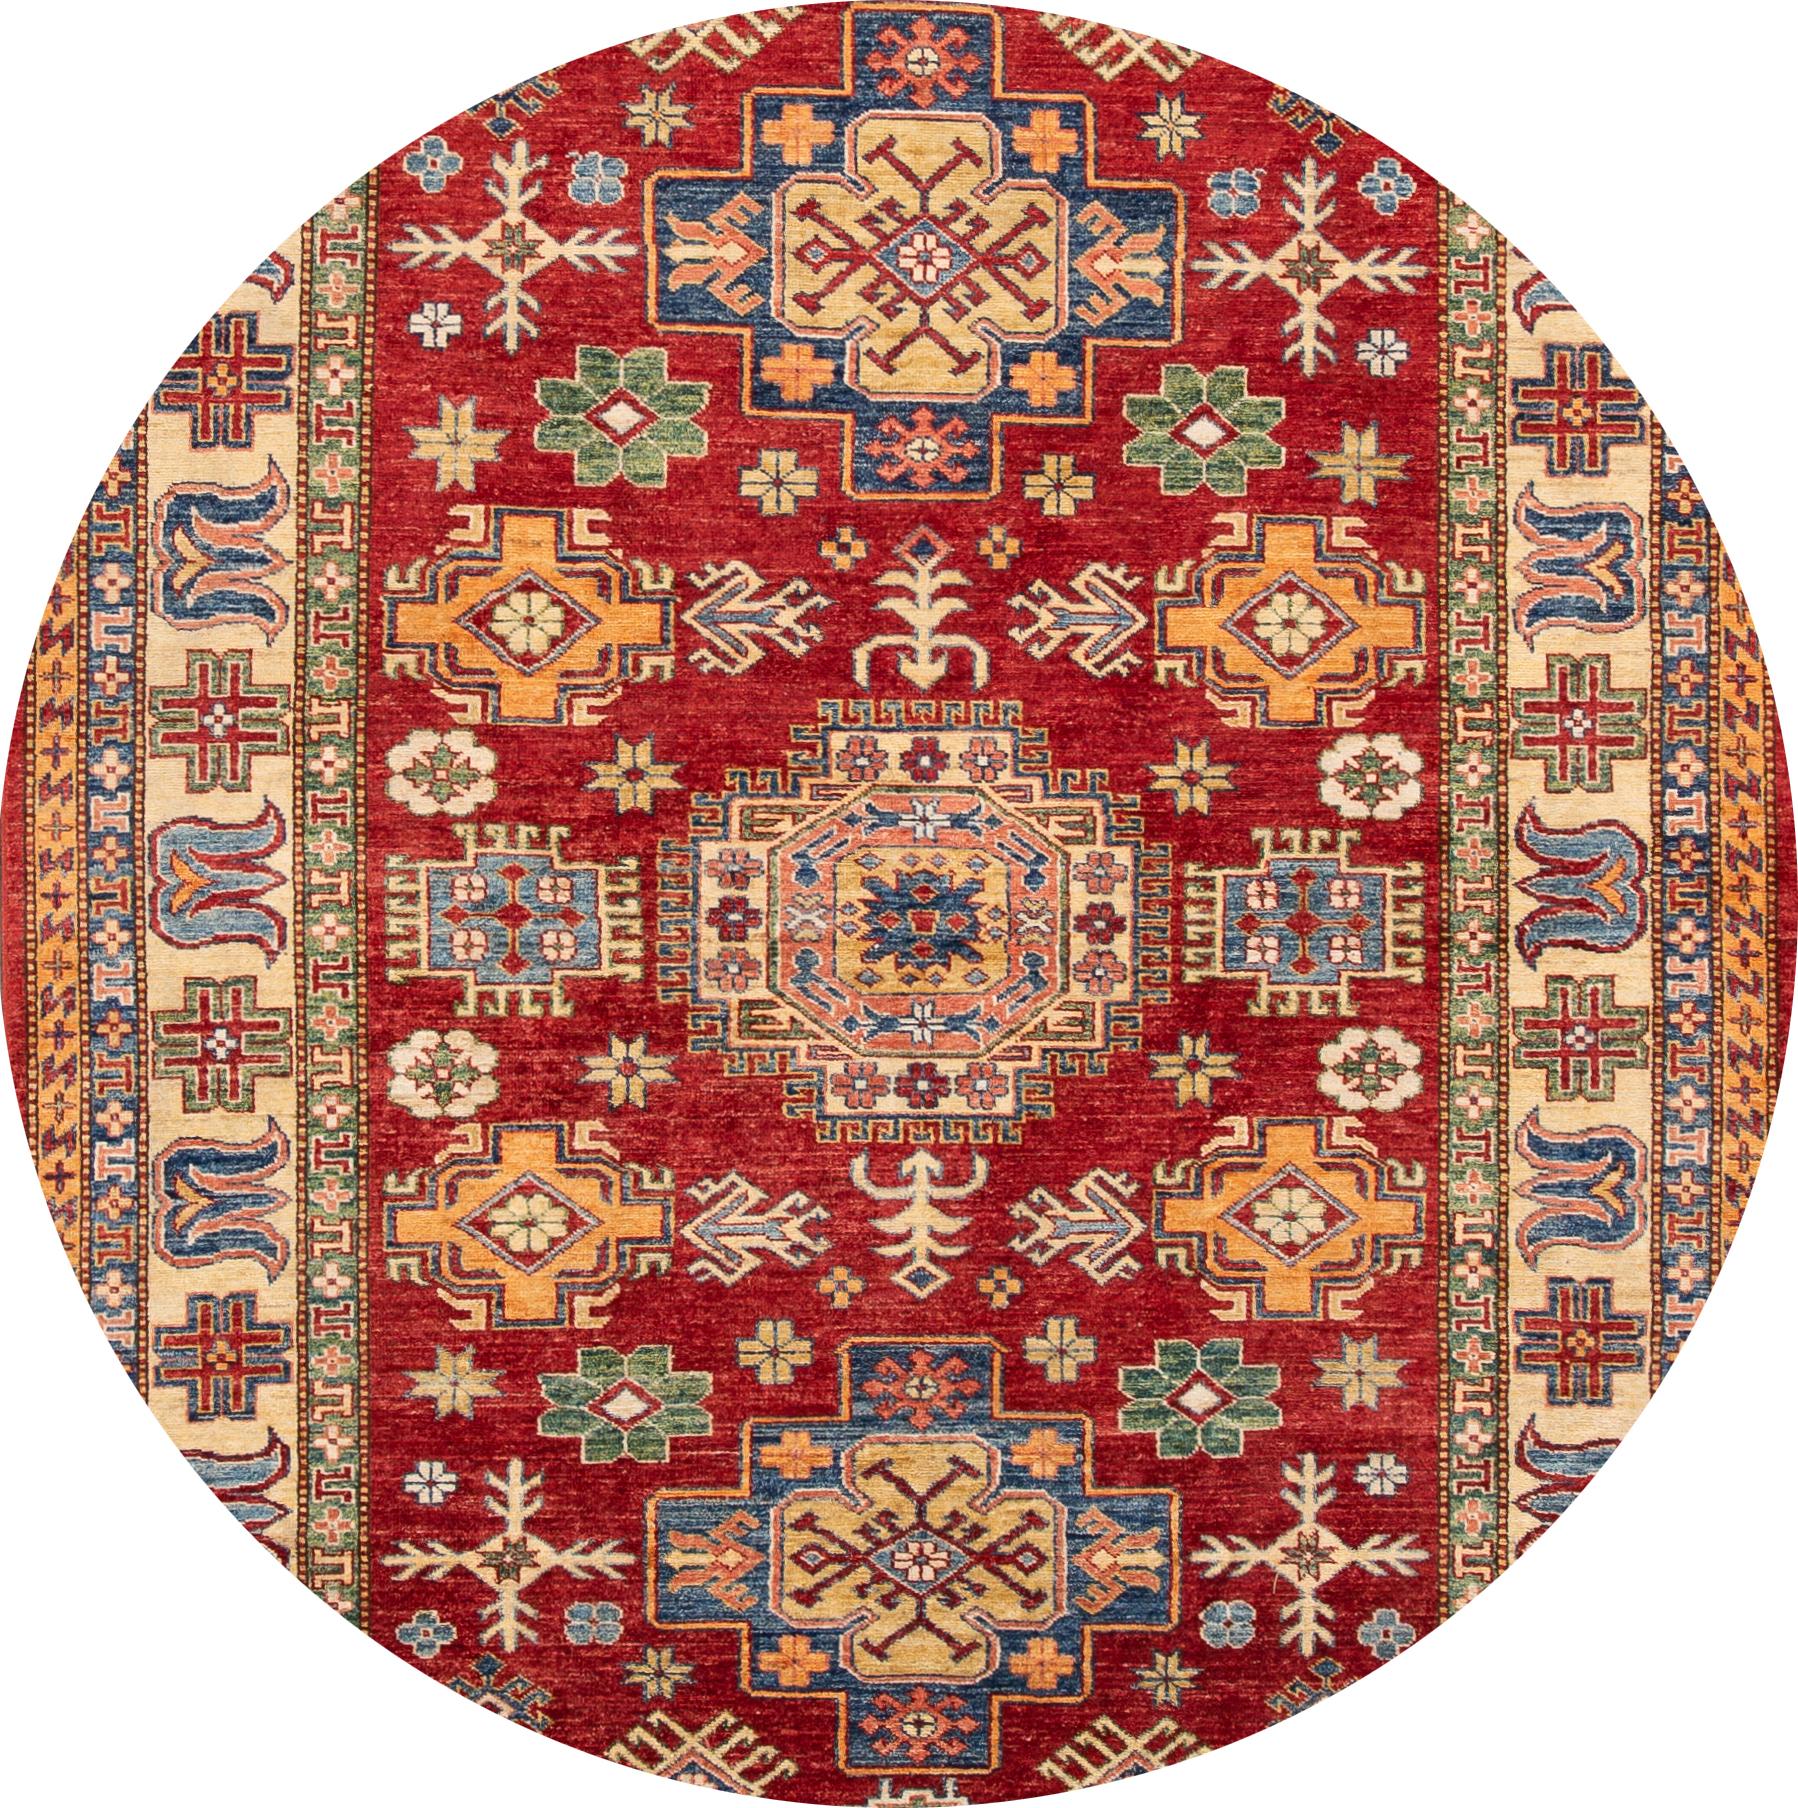 Beautiful Antique Kazak Rug, hand-knotted wool with a bright red field, cream frame, orange and blue accents in allover multi medallion design.
This rug measures 6' 1